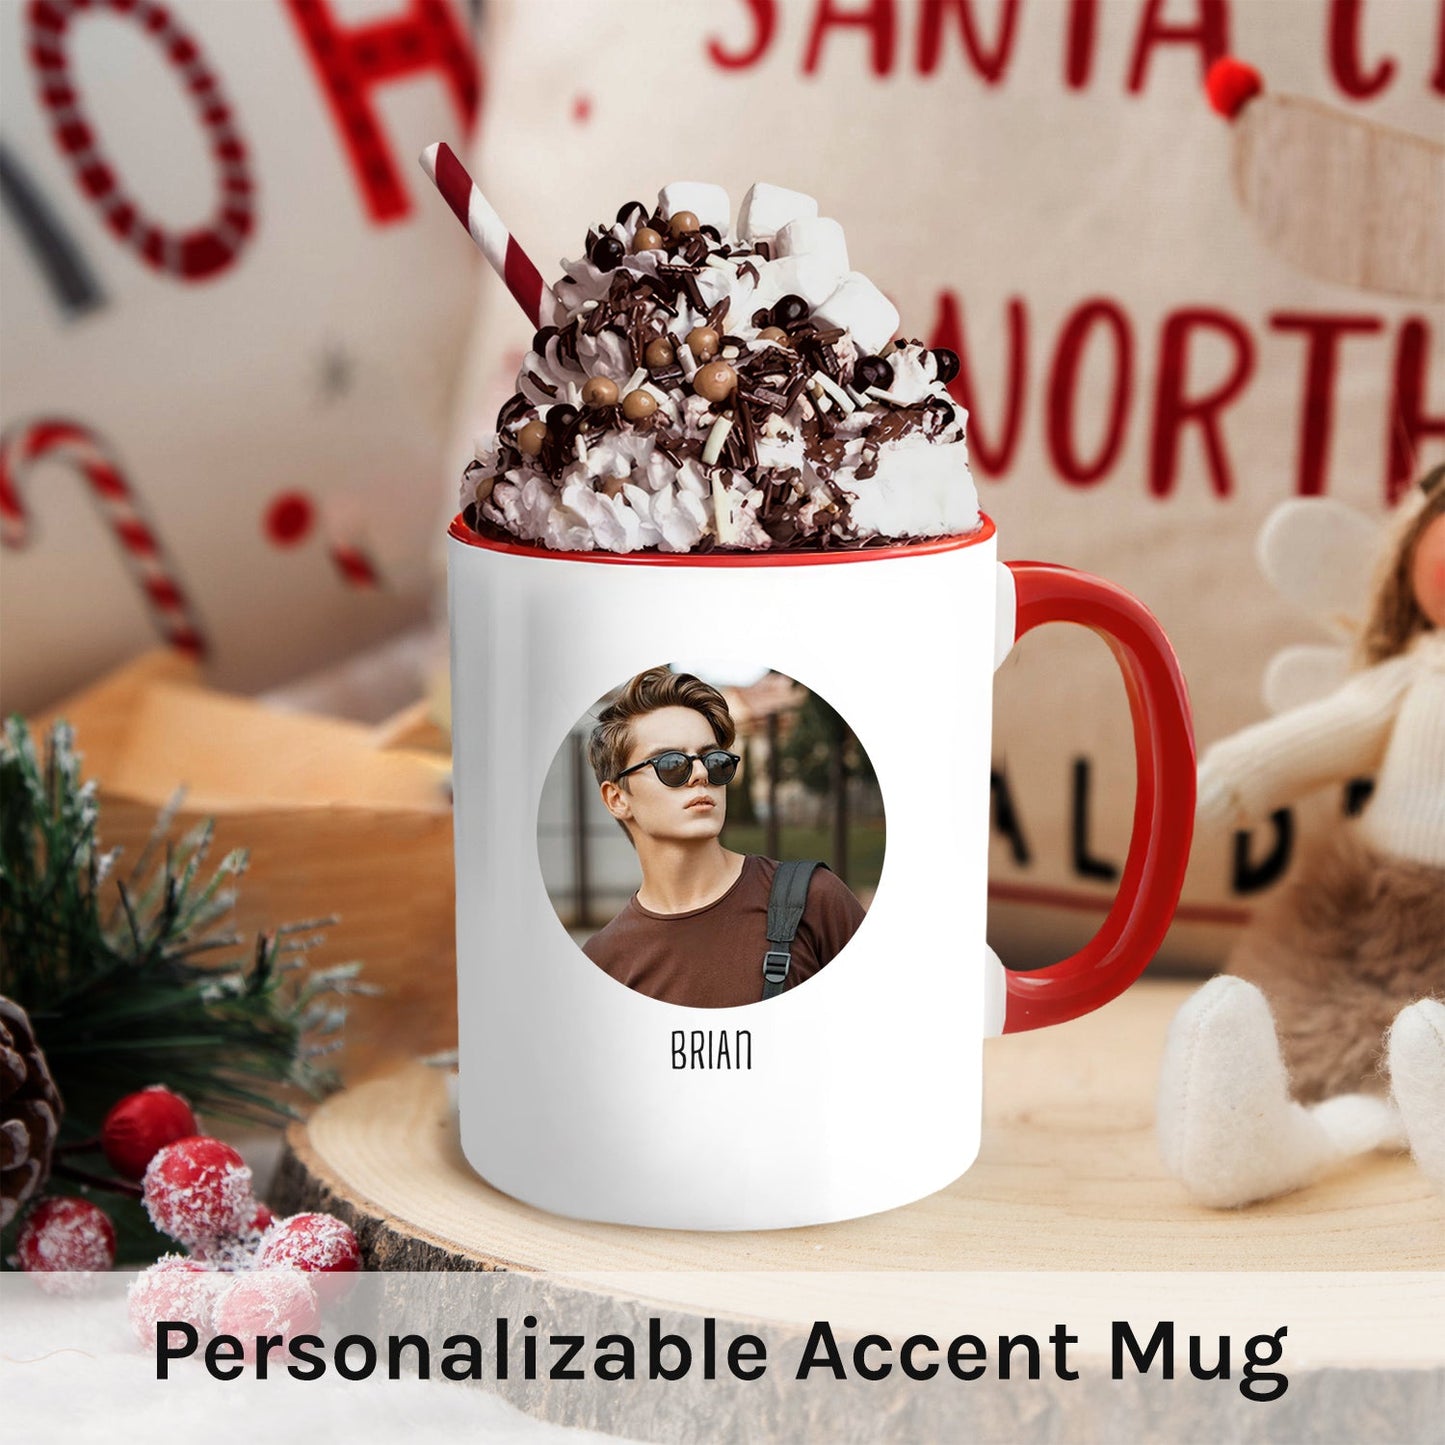 A Super Cool Grandson - Personalized Birthday or Christmas gift For Grandson - Custom Accent Mug - MyMindfulGifts